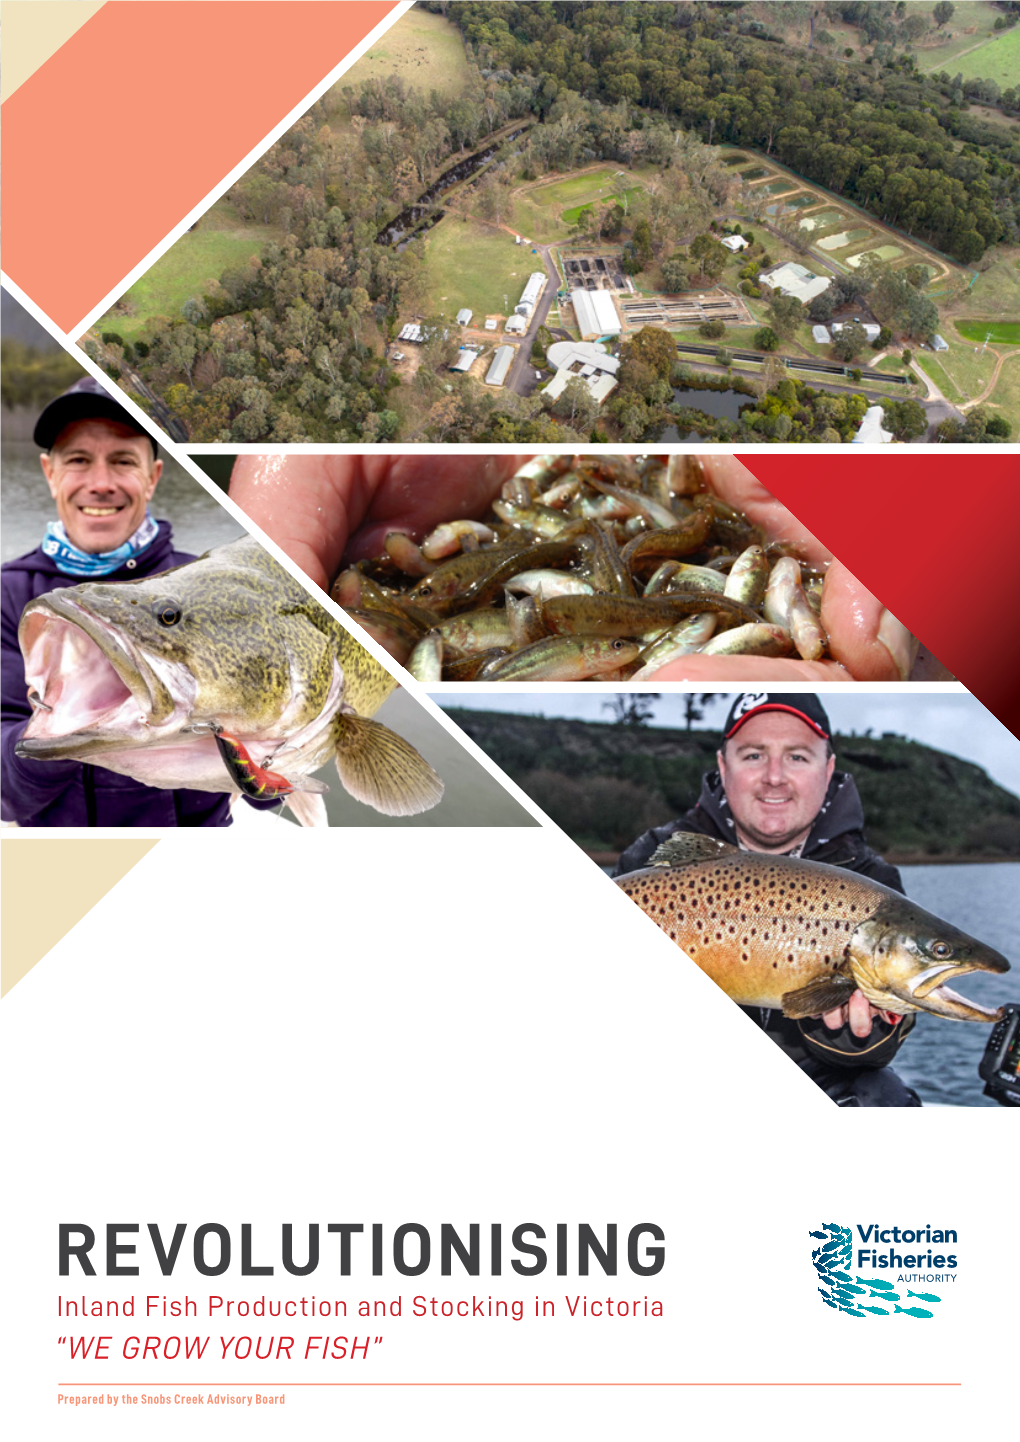 REVOLUTIONISING Inland Fish Production and Stocking in Victoria “WE GROW YOUR FISH”